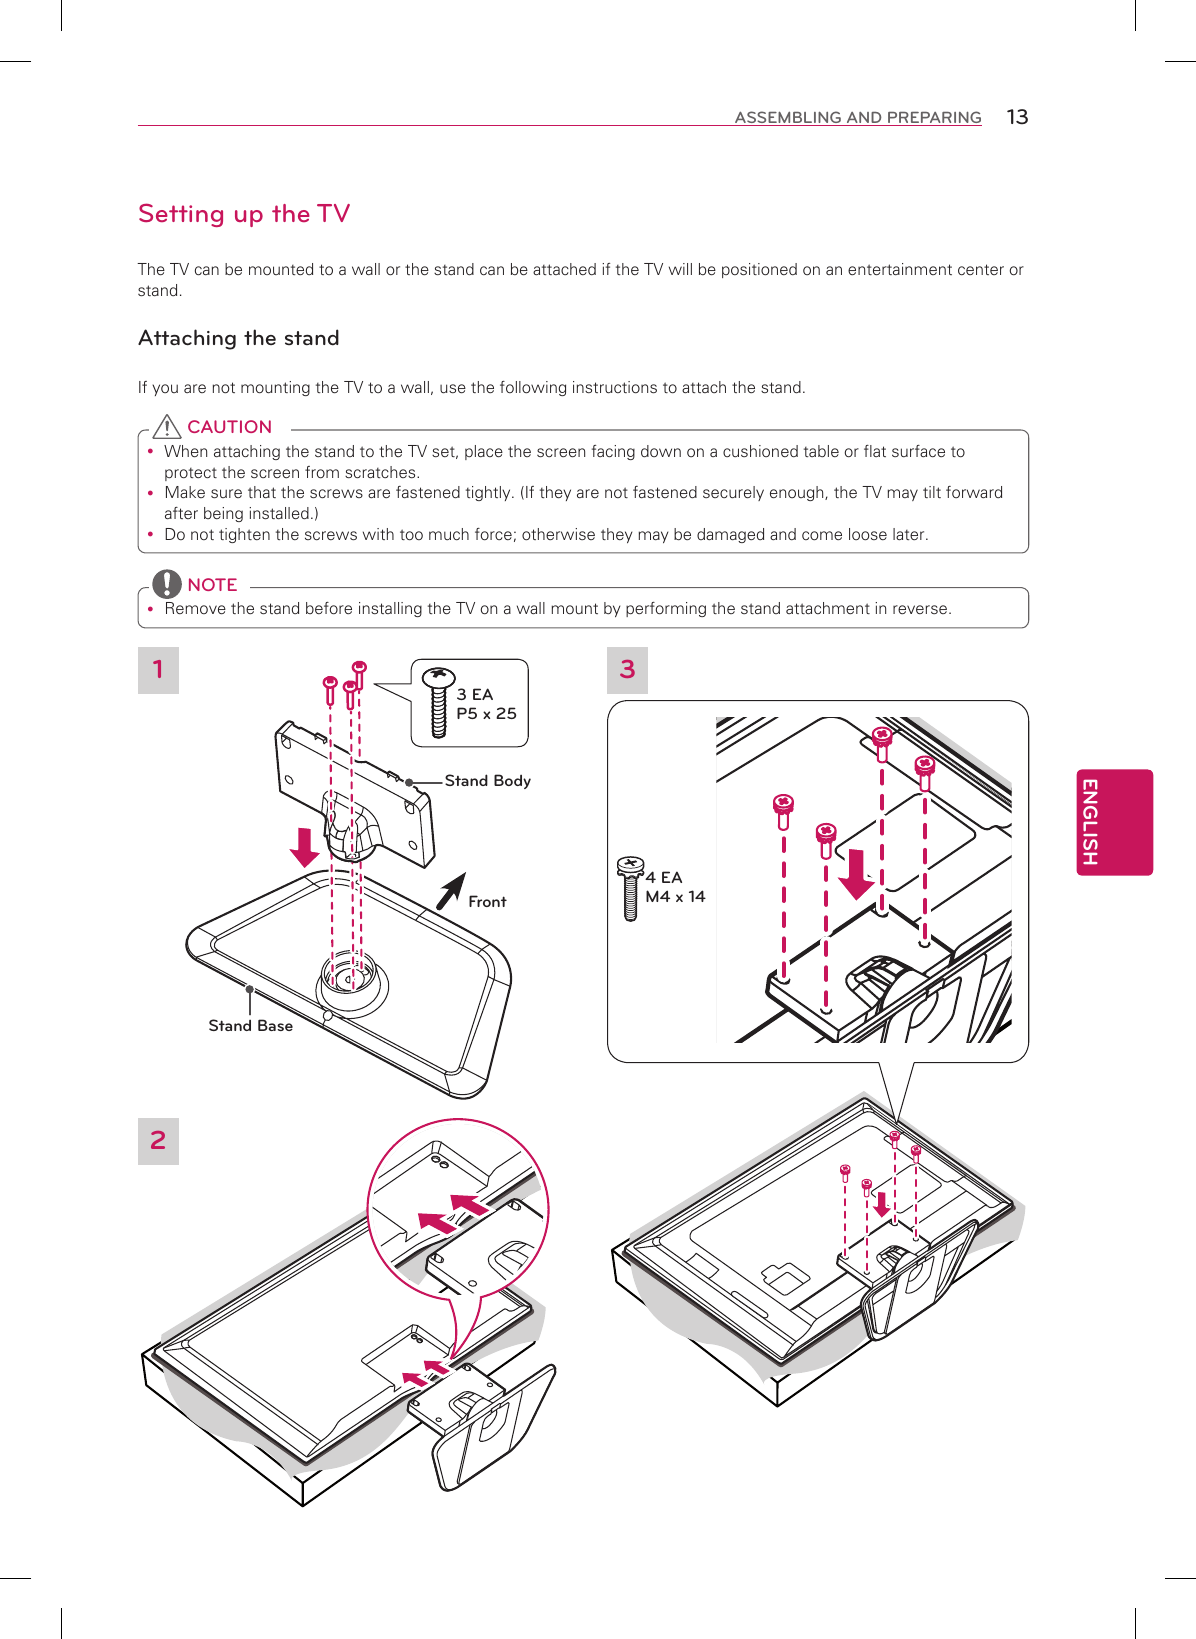 ENGLISH13ASSEMBLING AND PREPARINGSetting up the TVThe TV can be mounted to a wall or the stand can be attached if the TV will be positioned on an entertainment center or stand.Attaching the standIf you are not mounting the TV to a wall, use the following instructions to attach the stand. When attaching the stand to the TV set, place the screen facing down on a cushioned table or flat surface to protect the screen from scratches. Make sure that the screws are fastened tightly. (If they are not fastened securely enough, the TV may tilt forward after being installed.) Do not tighten the screws with too much force; otherwise they may be damaged and come loose later. CAUTION Remove the stand before installing the TV on a wall mount by performing the stand attachment in reverse. NOTE3Stand BodyStand BaseFront13 EA P5 x 254 EA M4 x 142